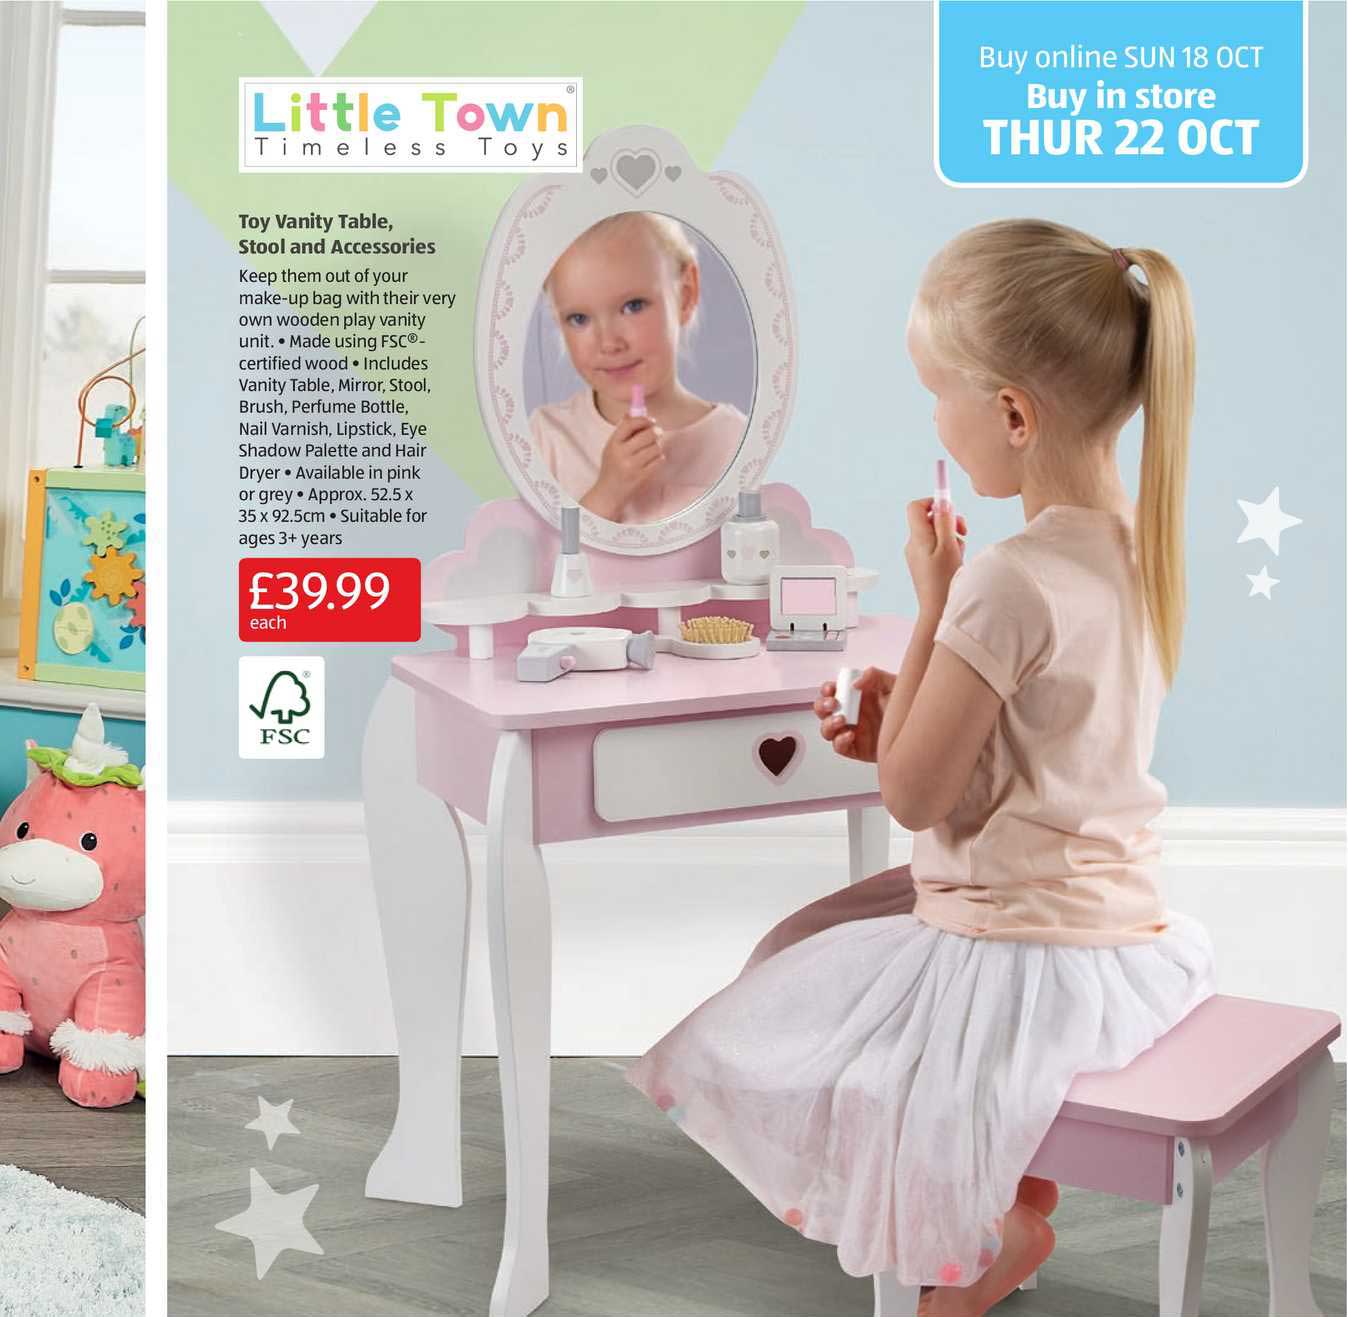 Aldi Toy Vanity Table, Stool And Accessories